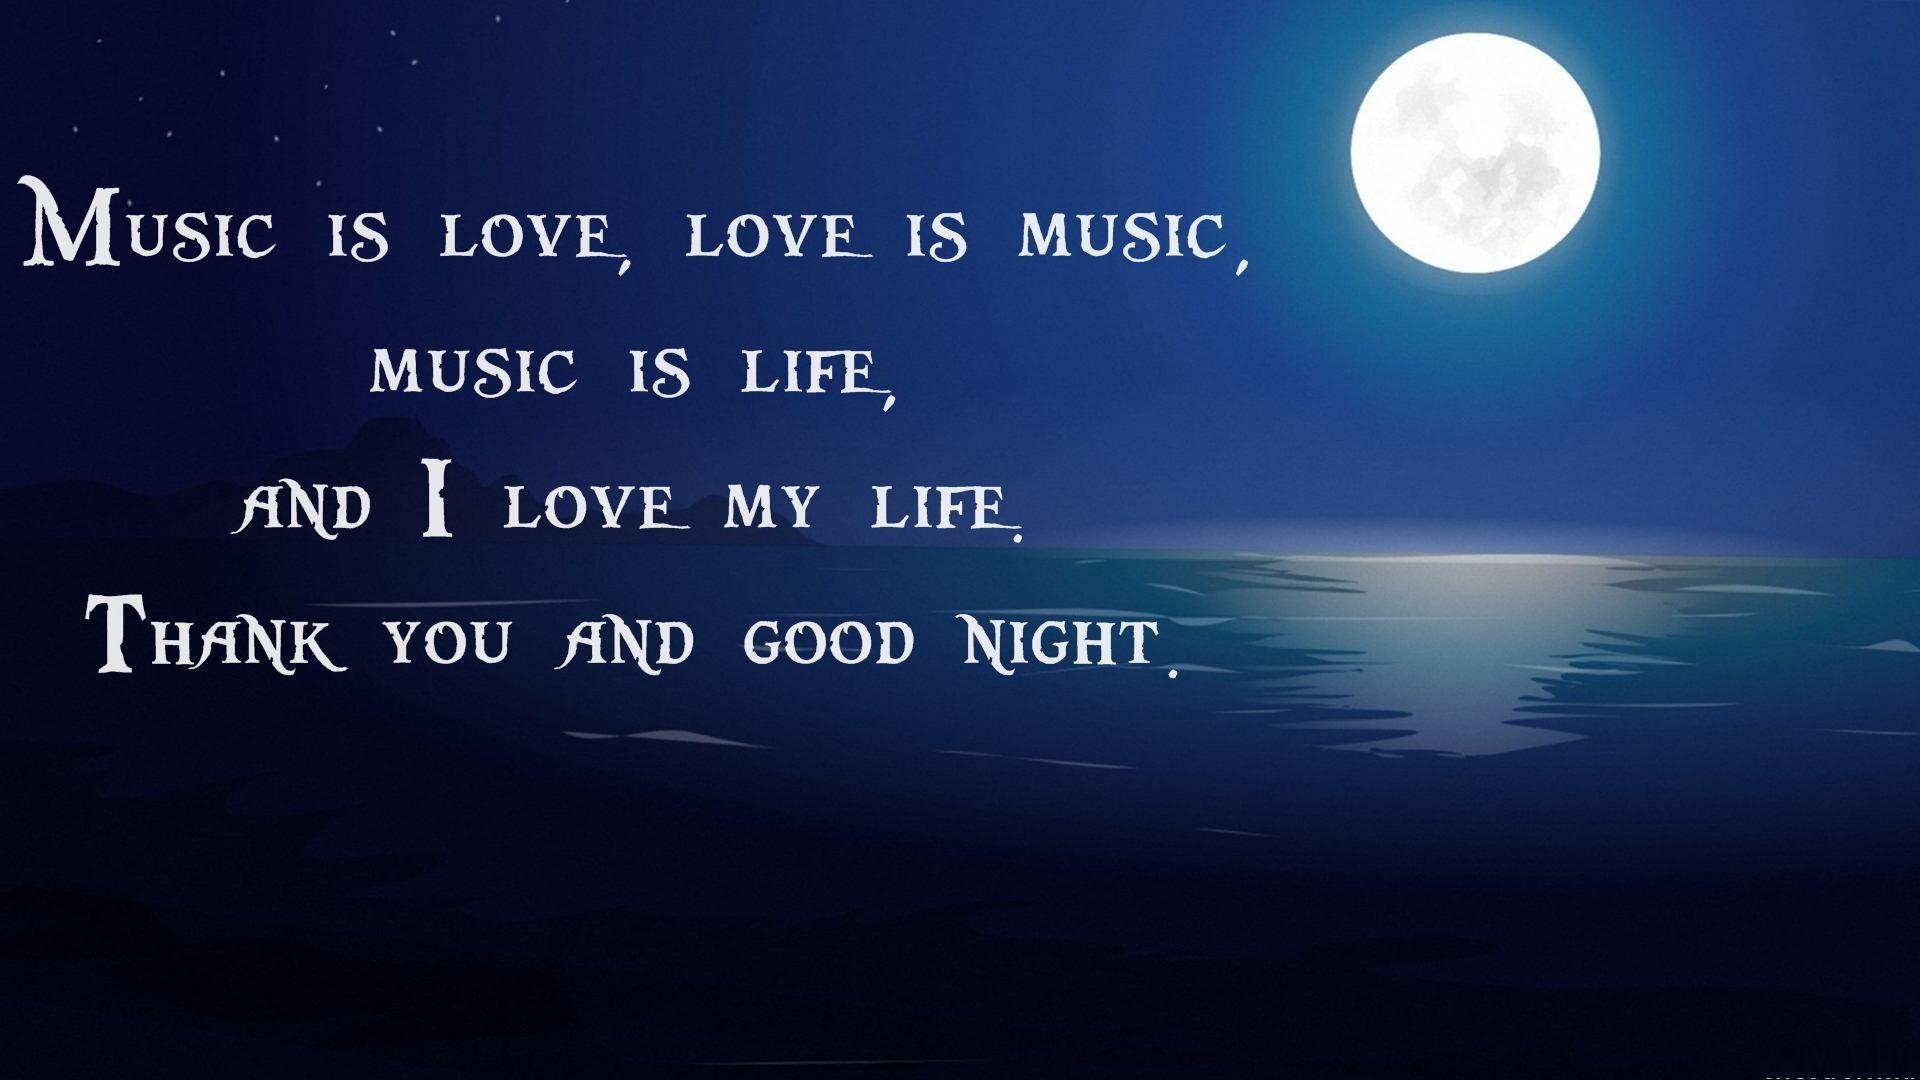 Good Night Wallpaper HD with quotes and wishes. Good Night Image